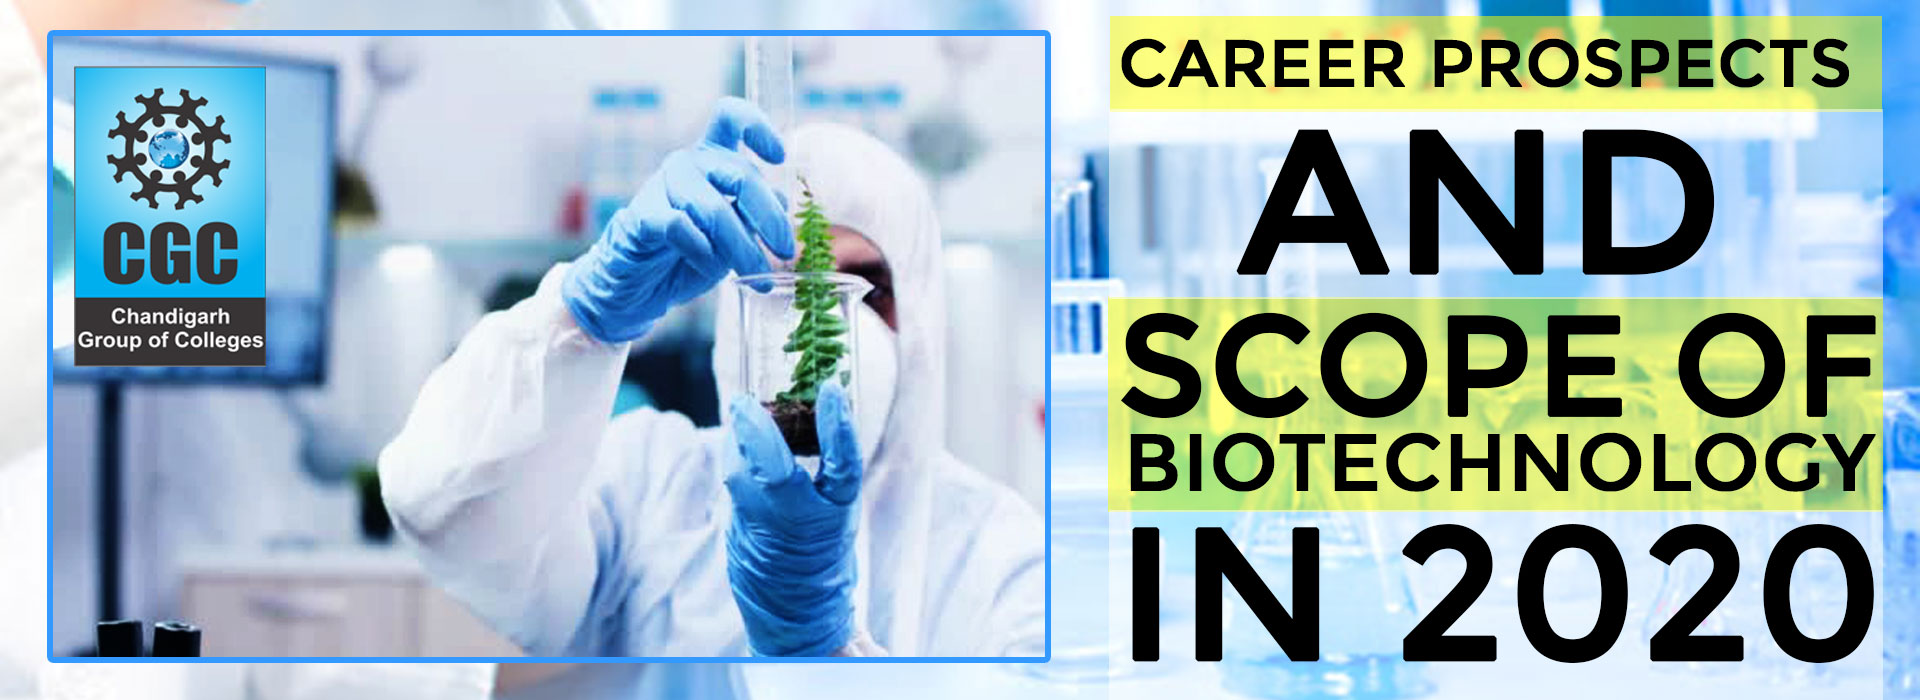 Career Prospects and Scope of Biotechnology in 2020 